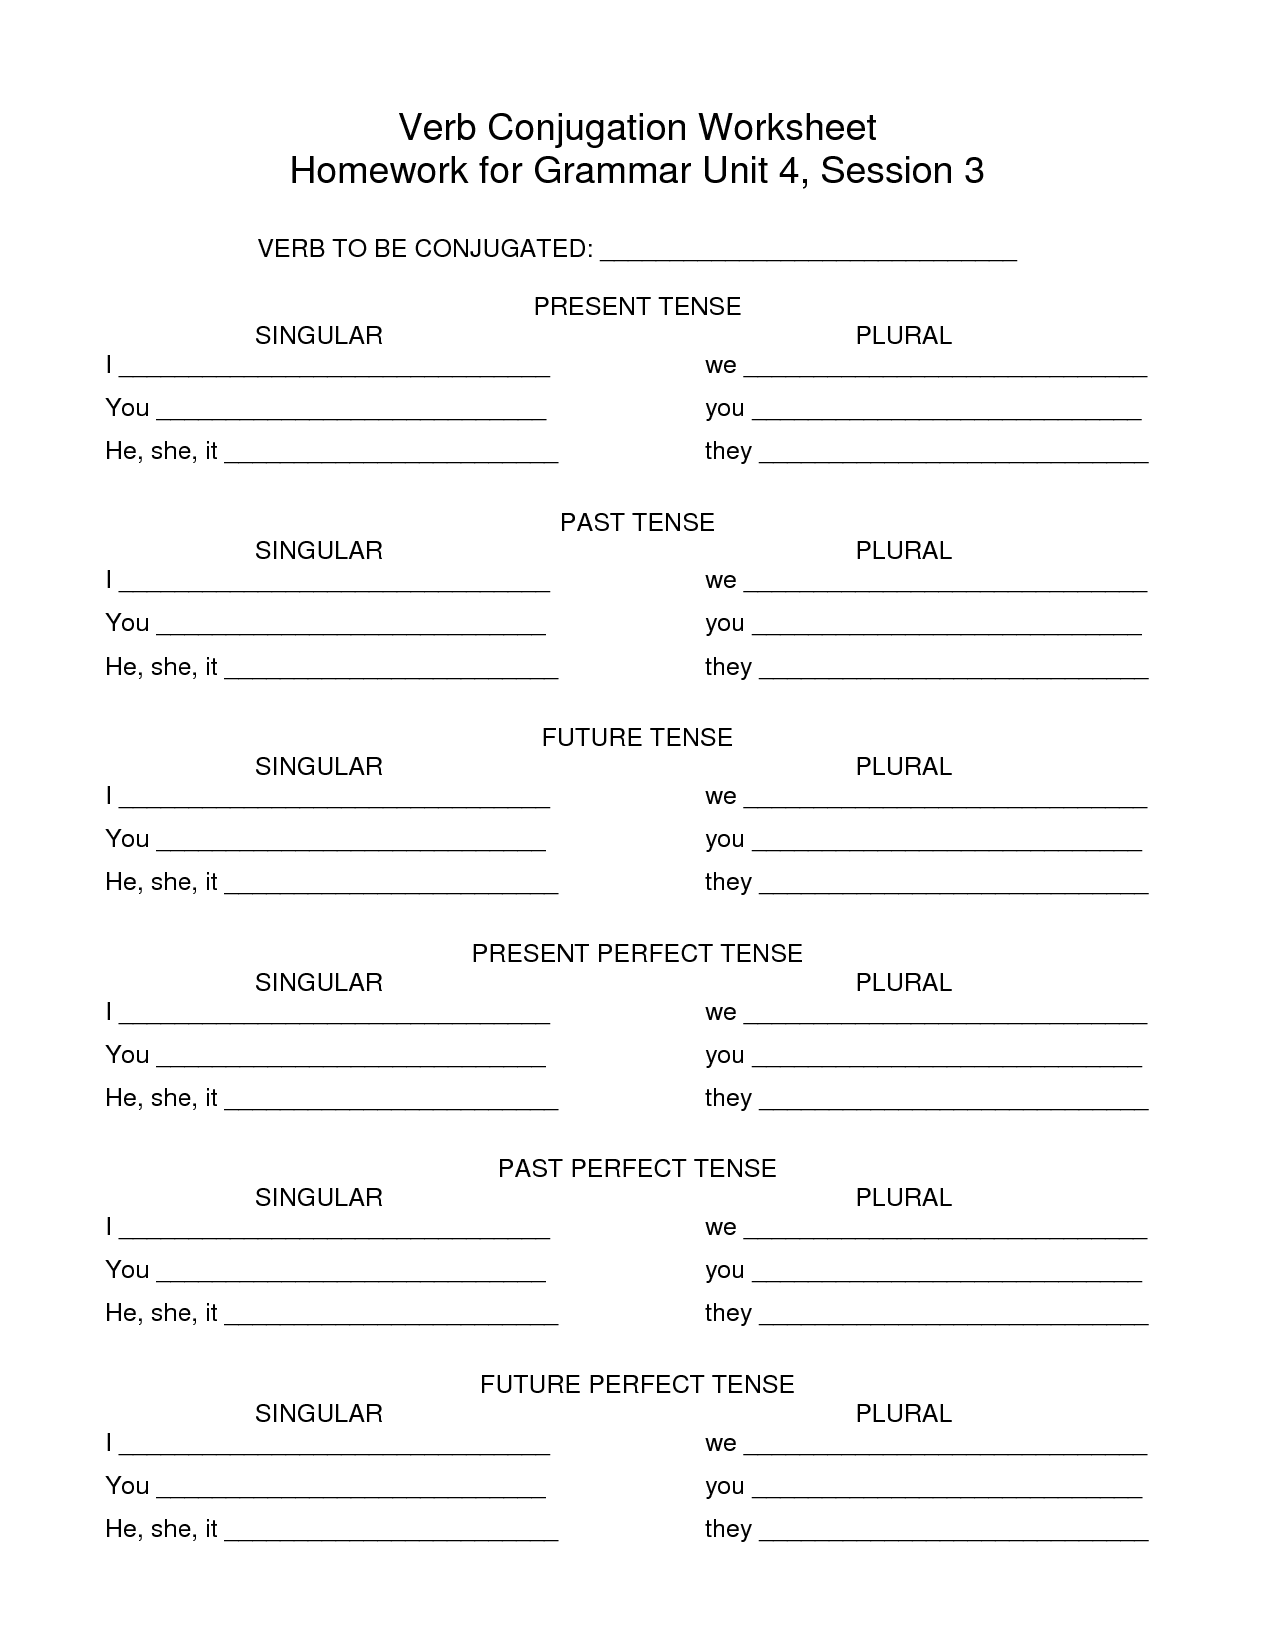 spanish-verb-conjugation-practice-worksheets-with-past-present-and-future-tense-verbs-worksheets